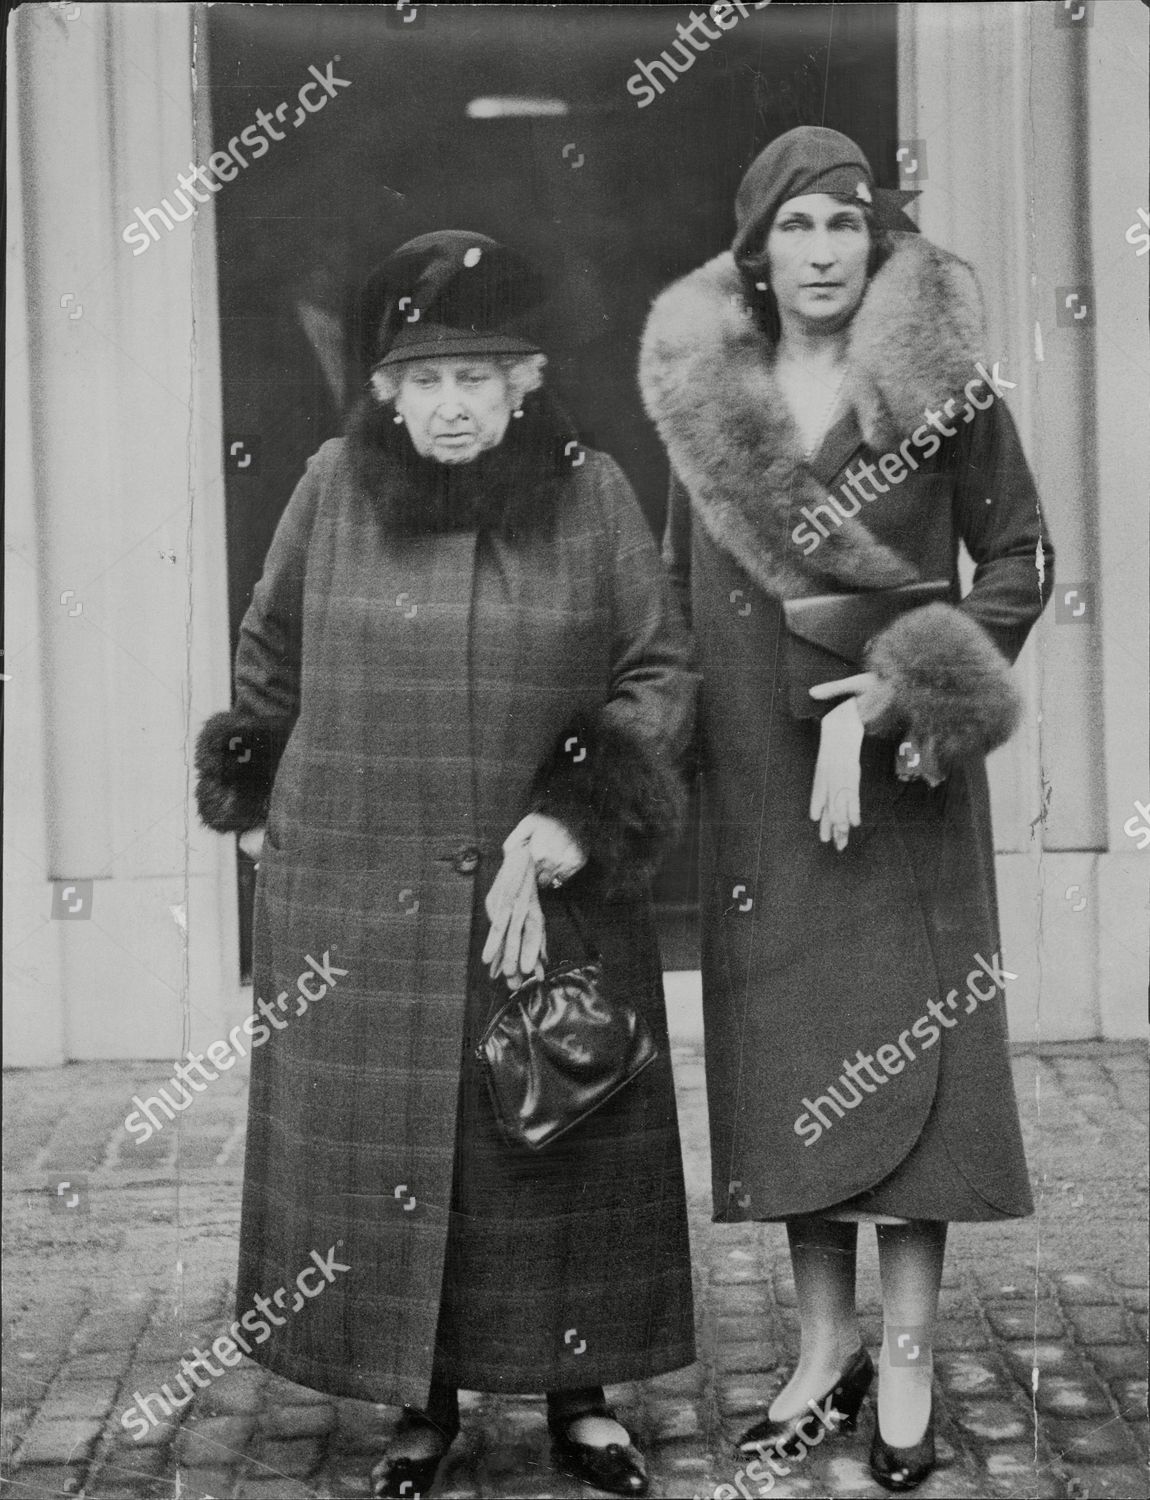 the-queen-victoria-of-spain-with-her-mother-princess-beatrice-princess-victoria-eugenie-of-battenberg-christened-victoria-eugenie-julia-ena-24-october-1887-oo-15-april-1969-was-queen-consort-of-king-alfonso-xiii-of-spain-she-was-a-granddaughter-o-shutterstock-editorial-2695355a.jpg